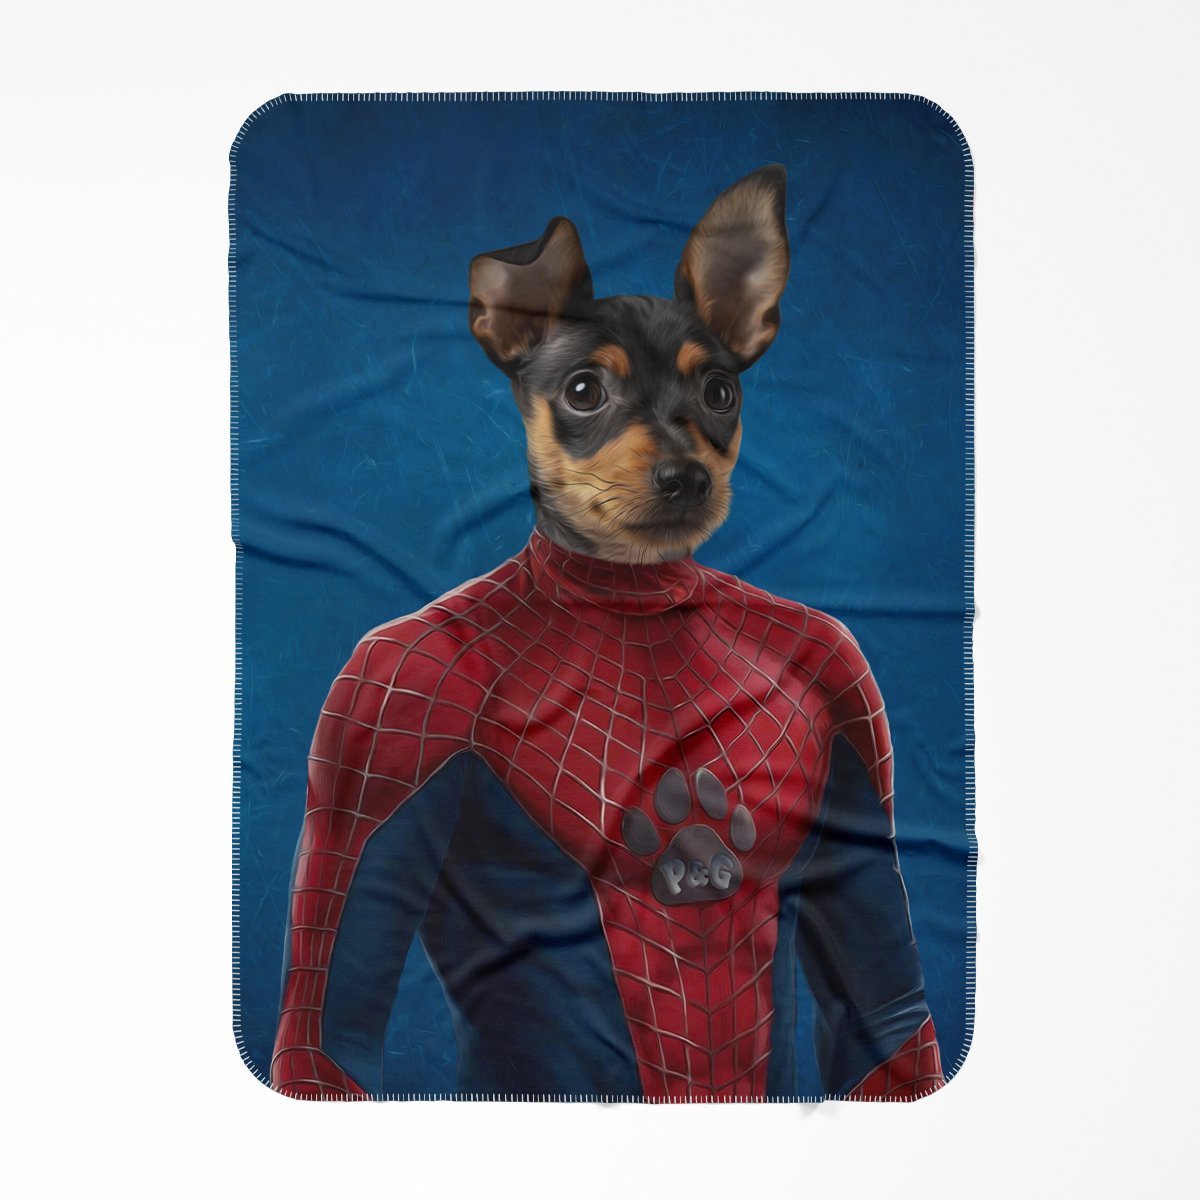 Spiderpet: Custom Pet Blanket - Paw & Glory - #pet portraits# - #dog portraits# - #pet portraits uk#Pawandglory, Pet art blanket,Pet gifts, pet portrait gifts, pet oil painting, portrait of pet from photo, modern pet portraits